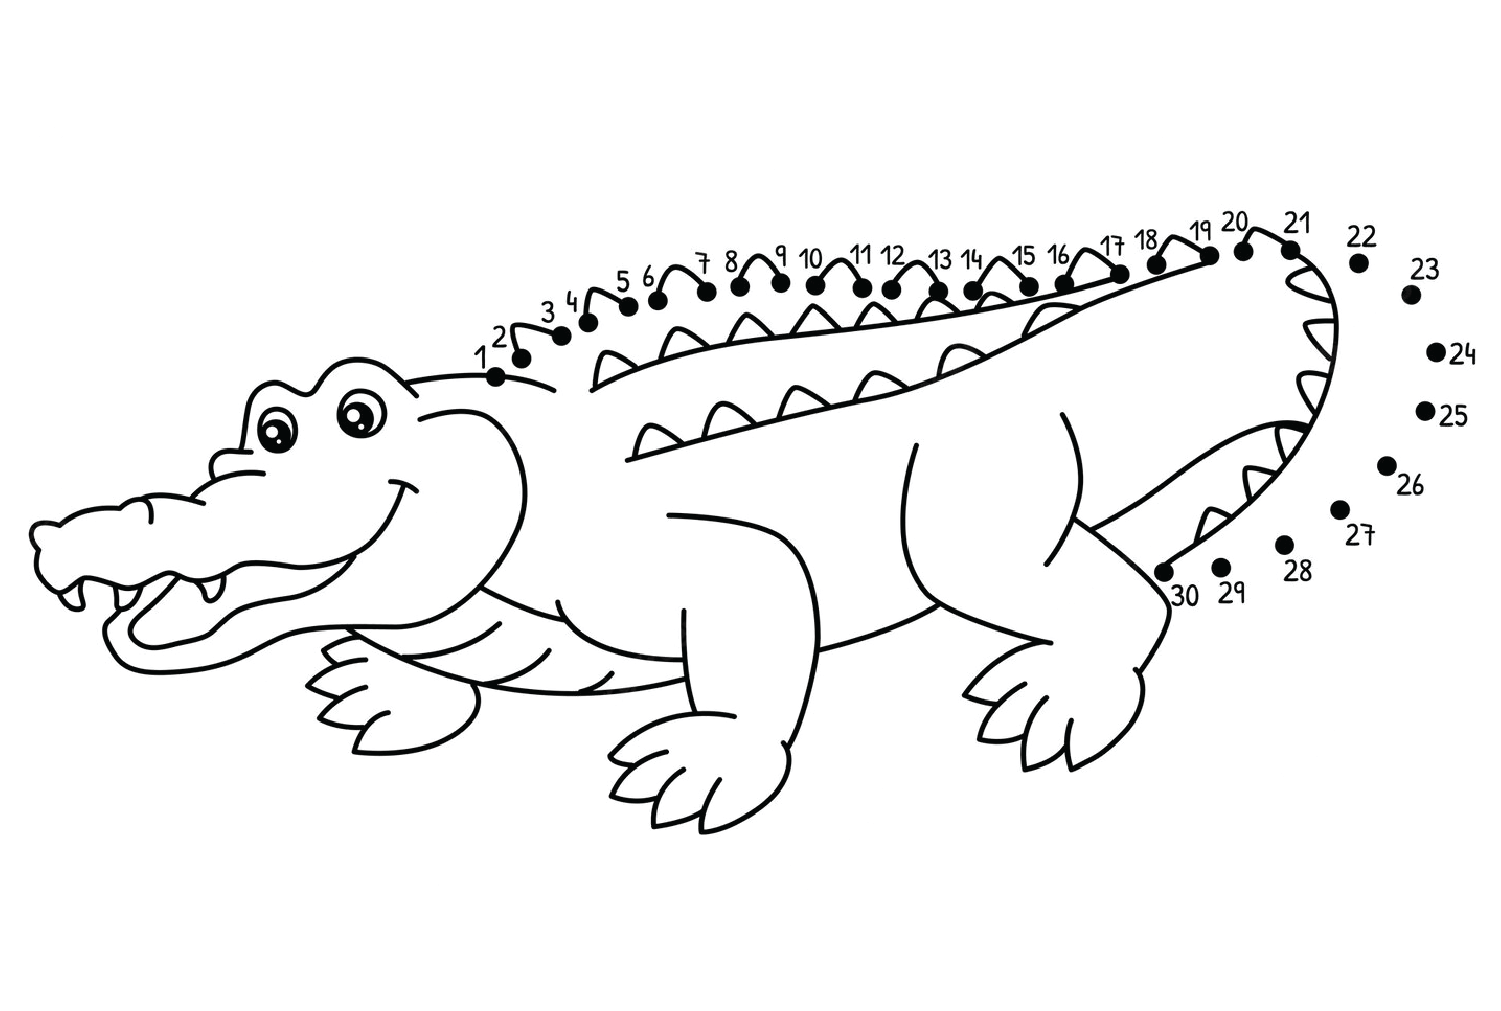 Dot to Dot Crocodile Coloring Page from Crocodile